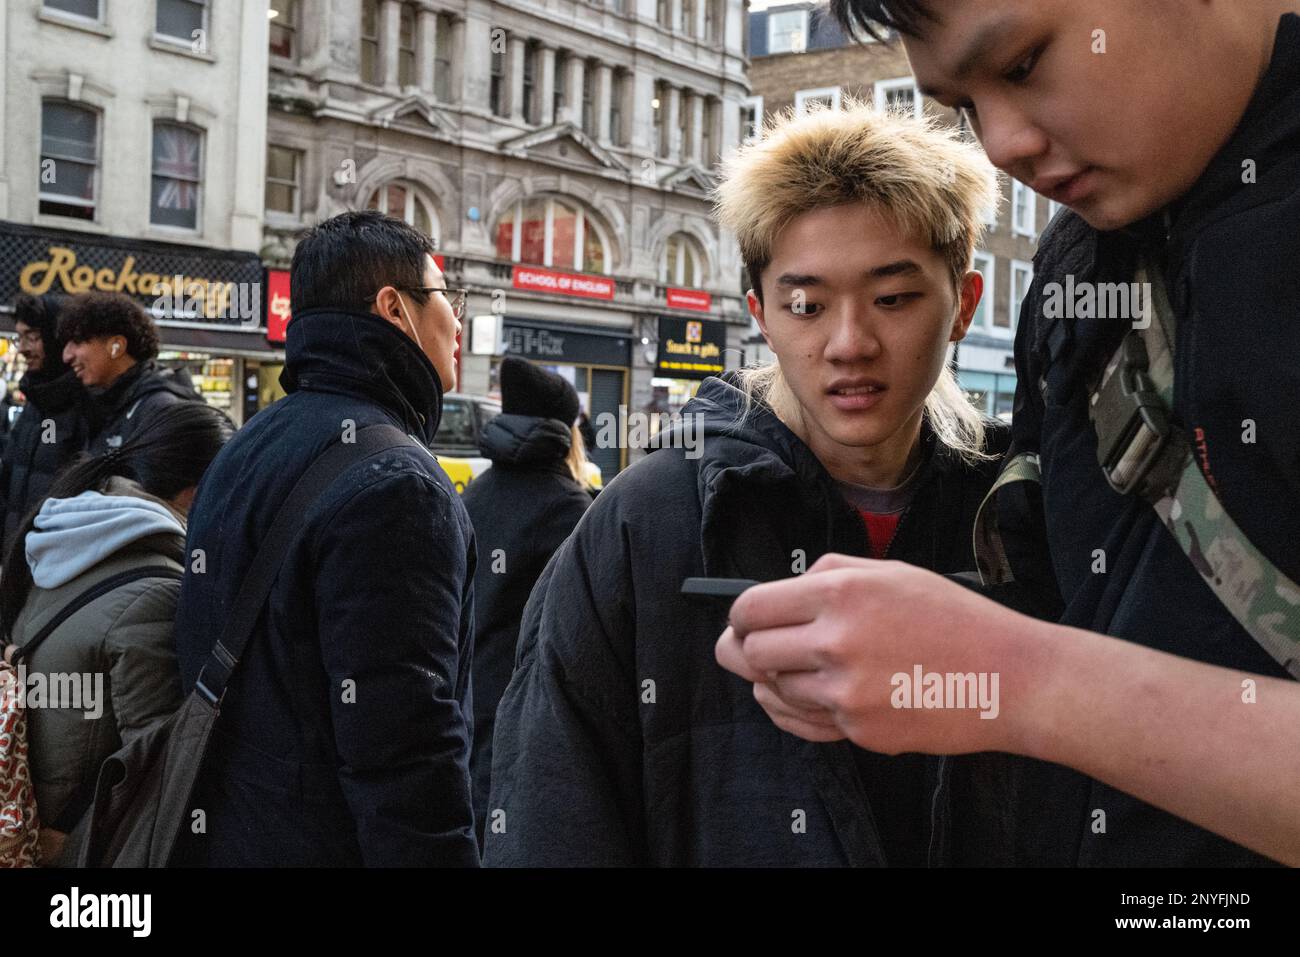 Two Asian males use a mobile/cell phone for information in city setting. London UK Stock Photo